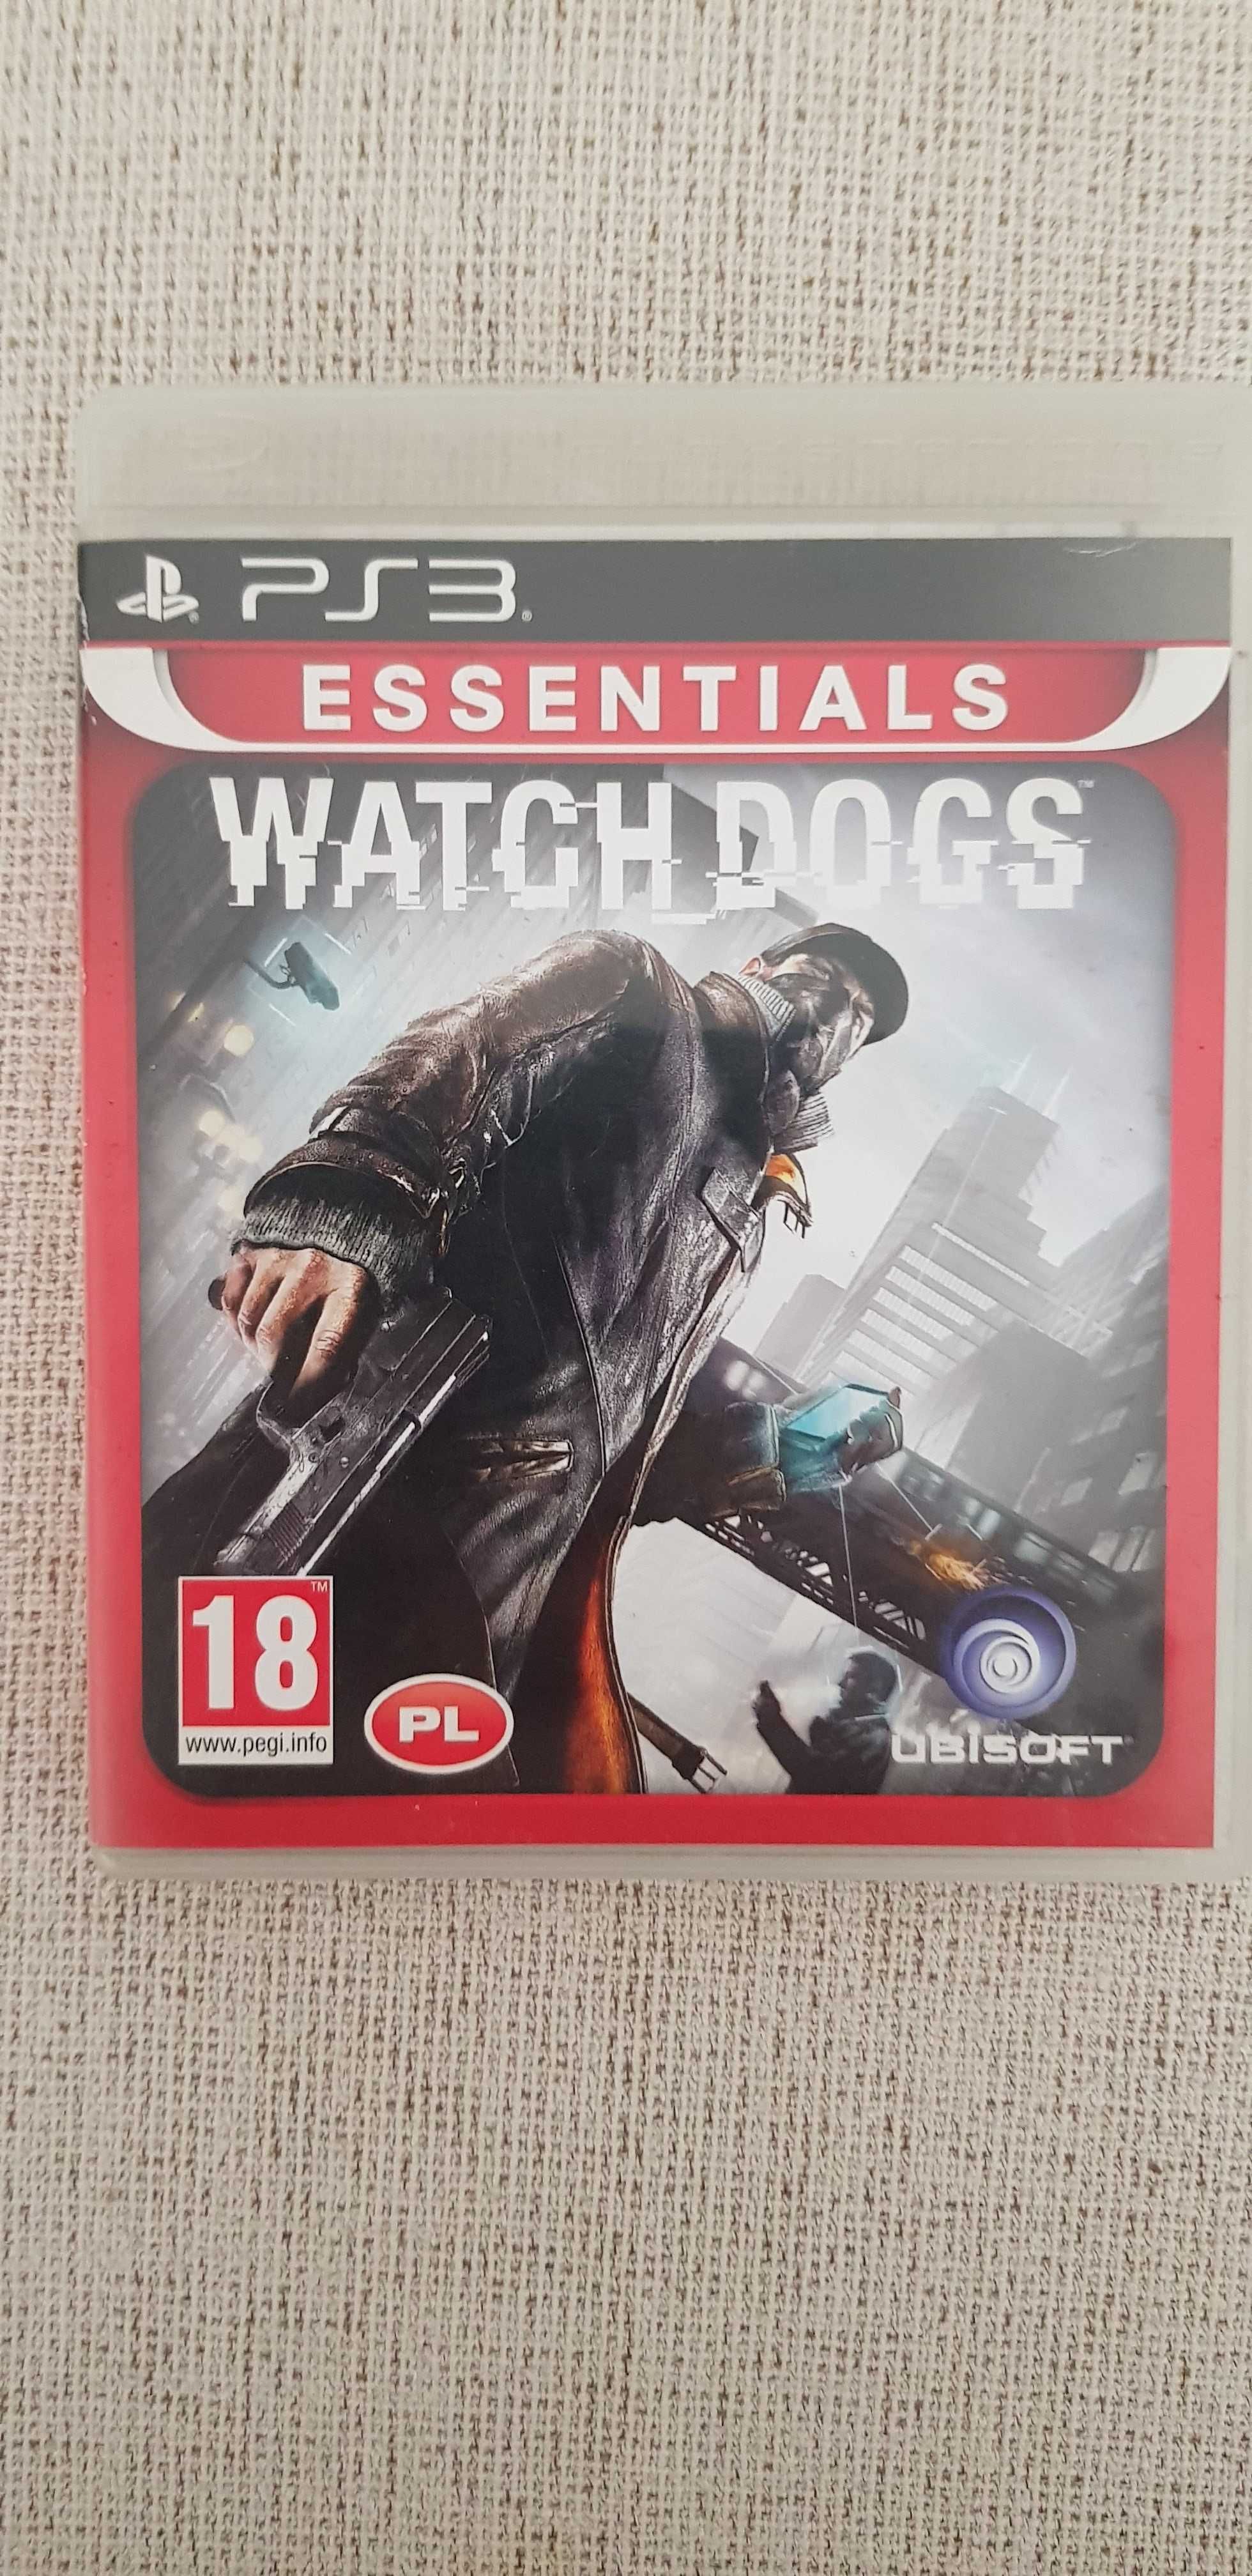 Watch Dogs PL PS3 + gratis Red Faction: Guerrilla